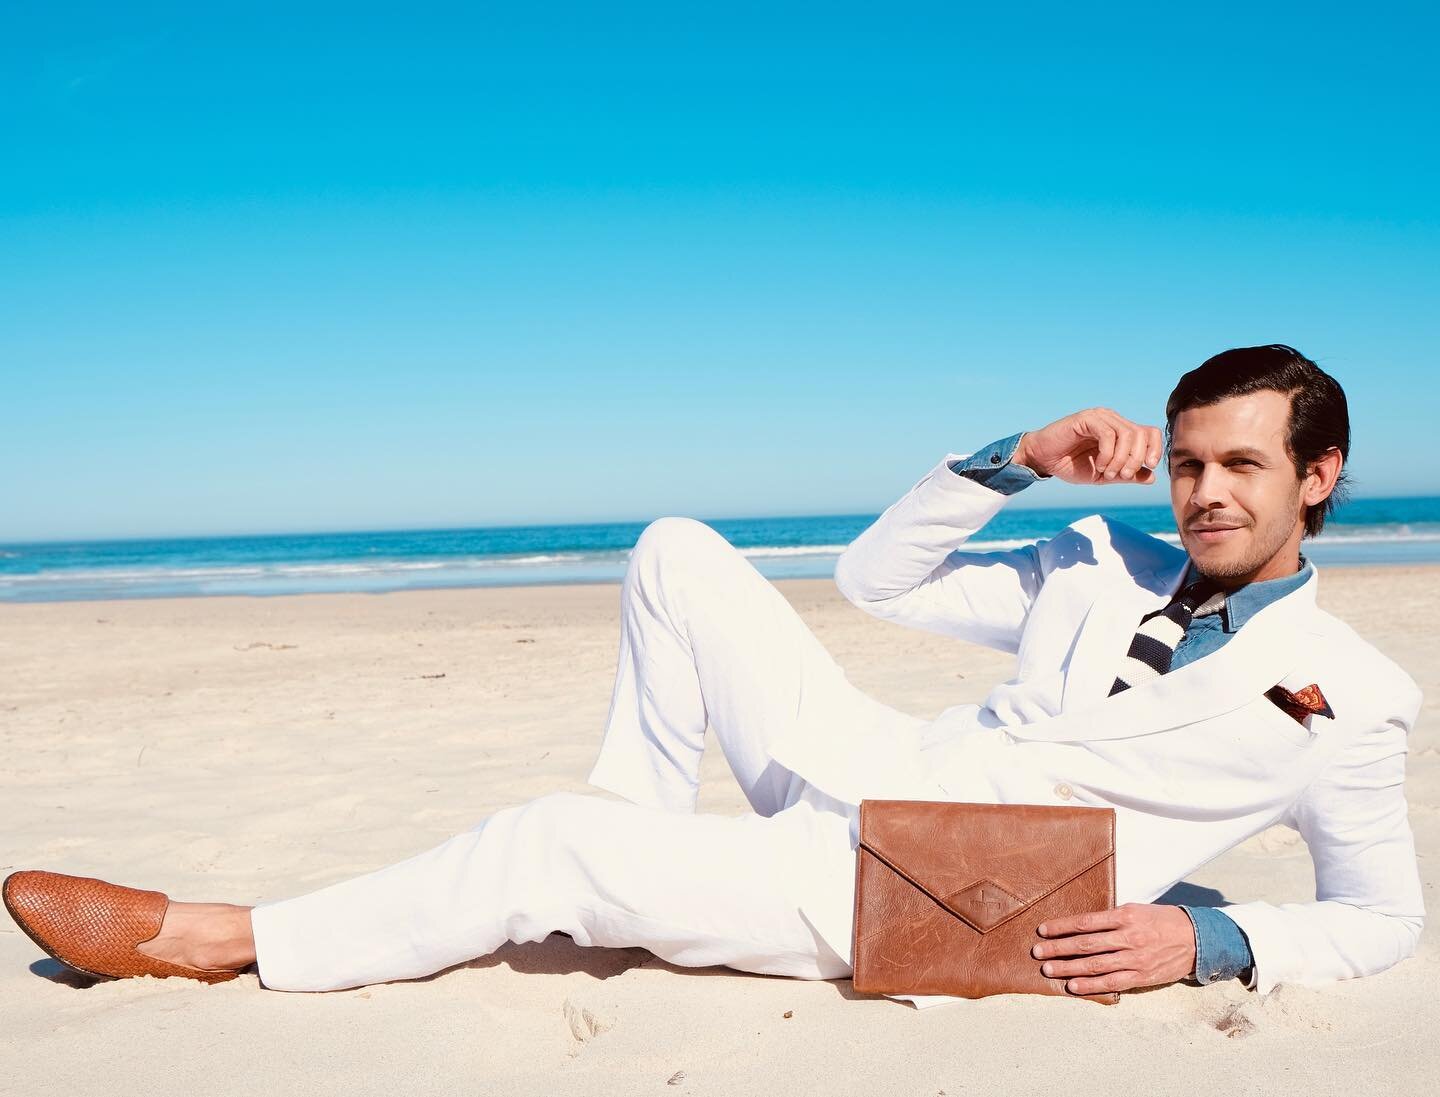 Out-swagger everyone with a white suit jacobsman.com 

#summer #jacobsman #menswear #style #cape town #fashion